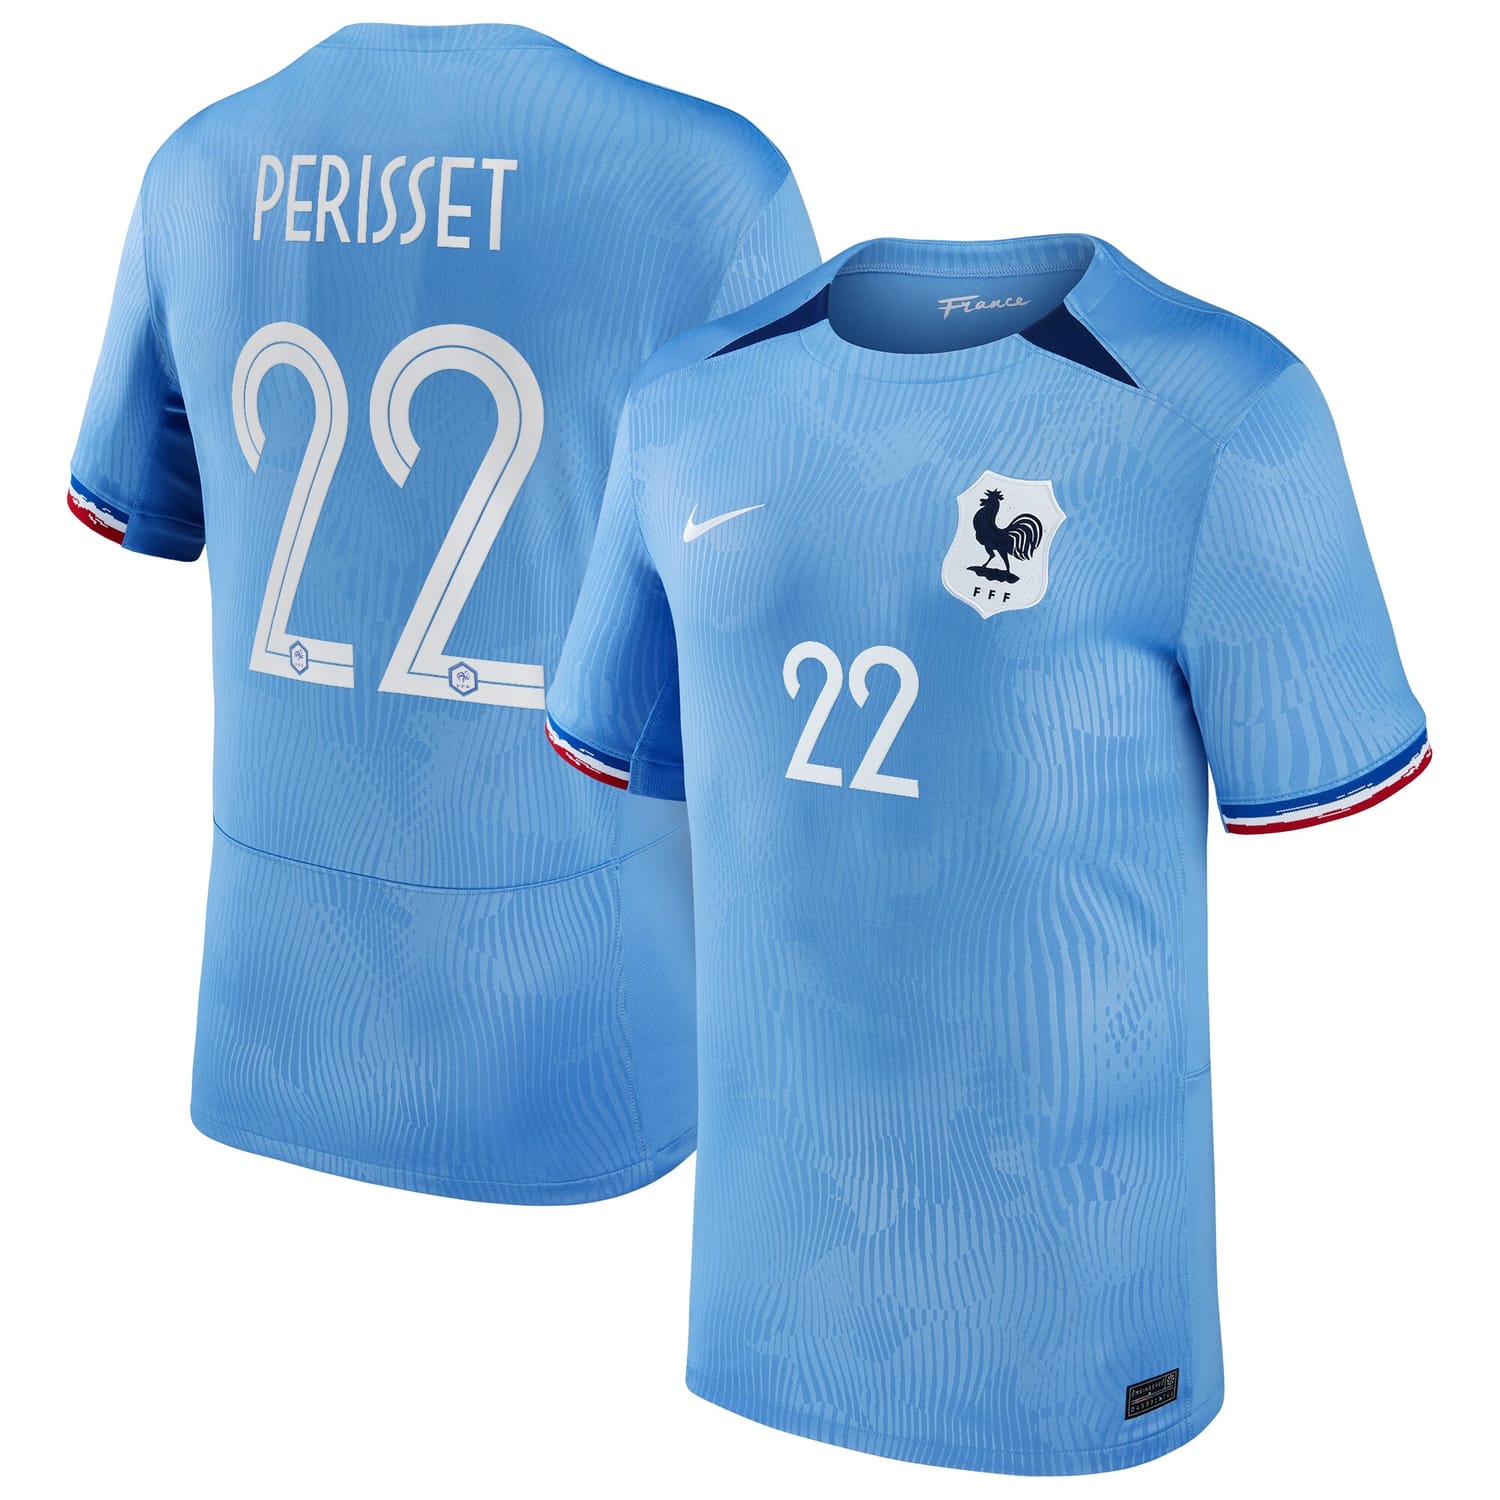 France National Team Home Jersey Shirt 2023-24 player Eve Perisset 22 printing for Men